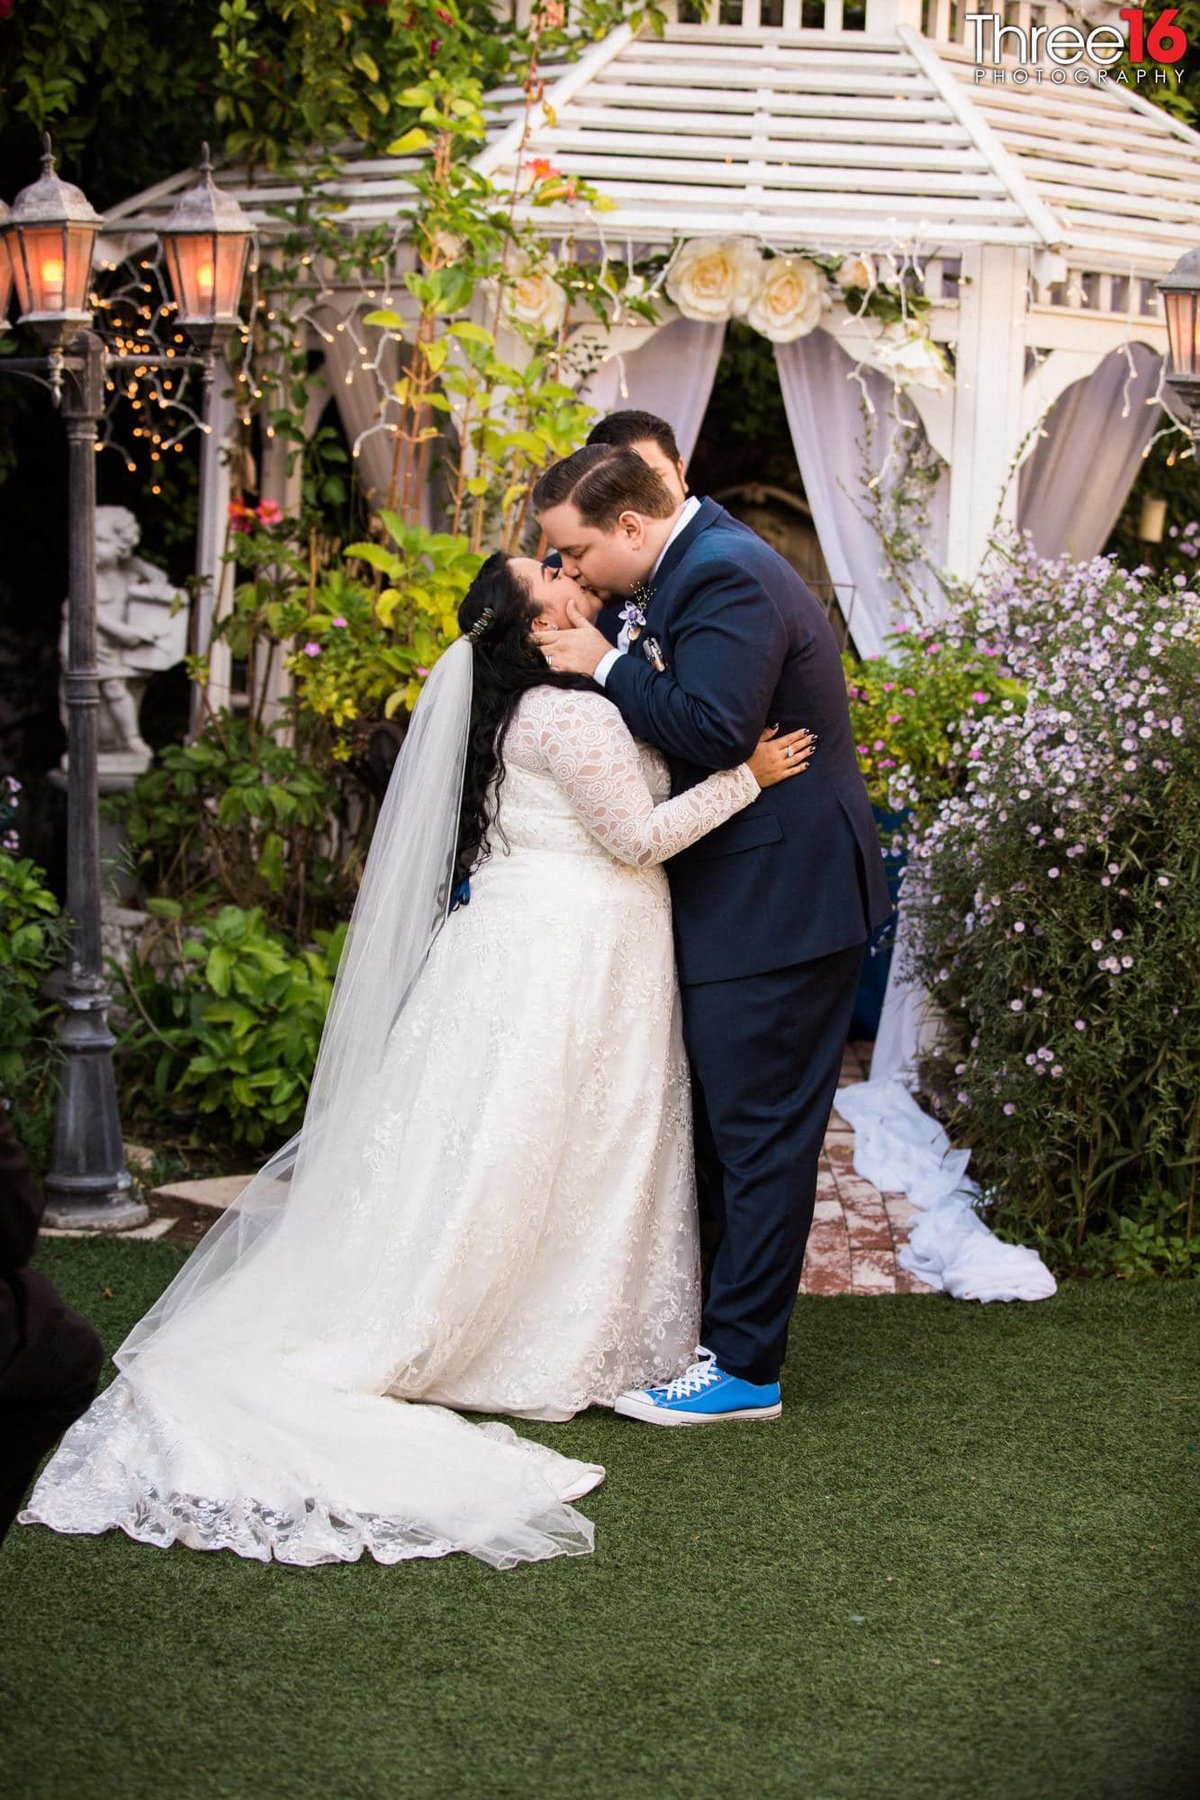 Bride and Groom share their first kiss as Husband and Wife